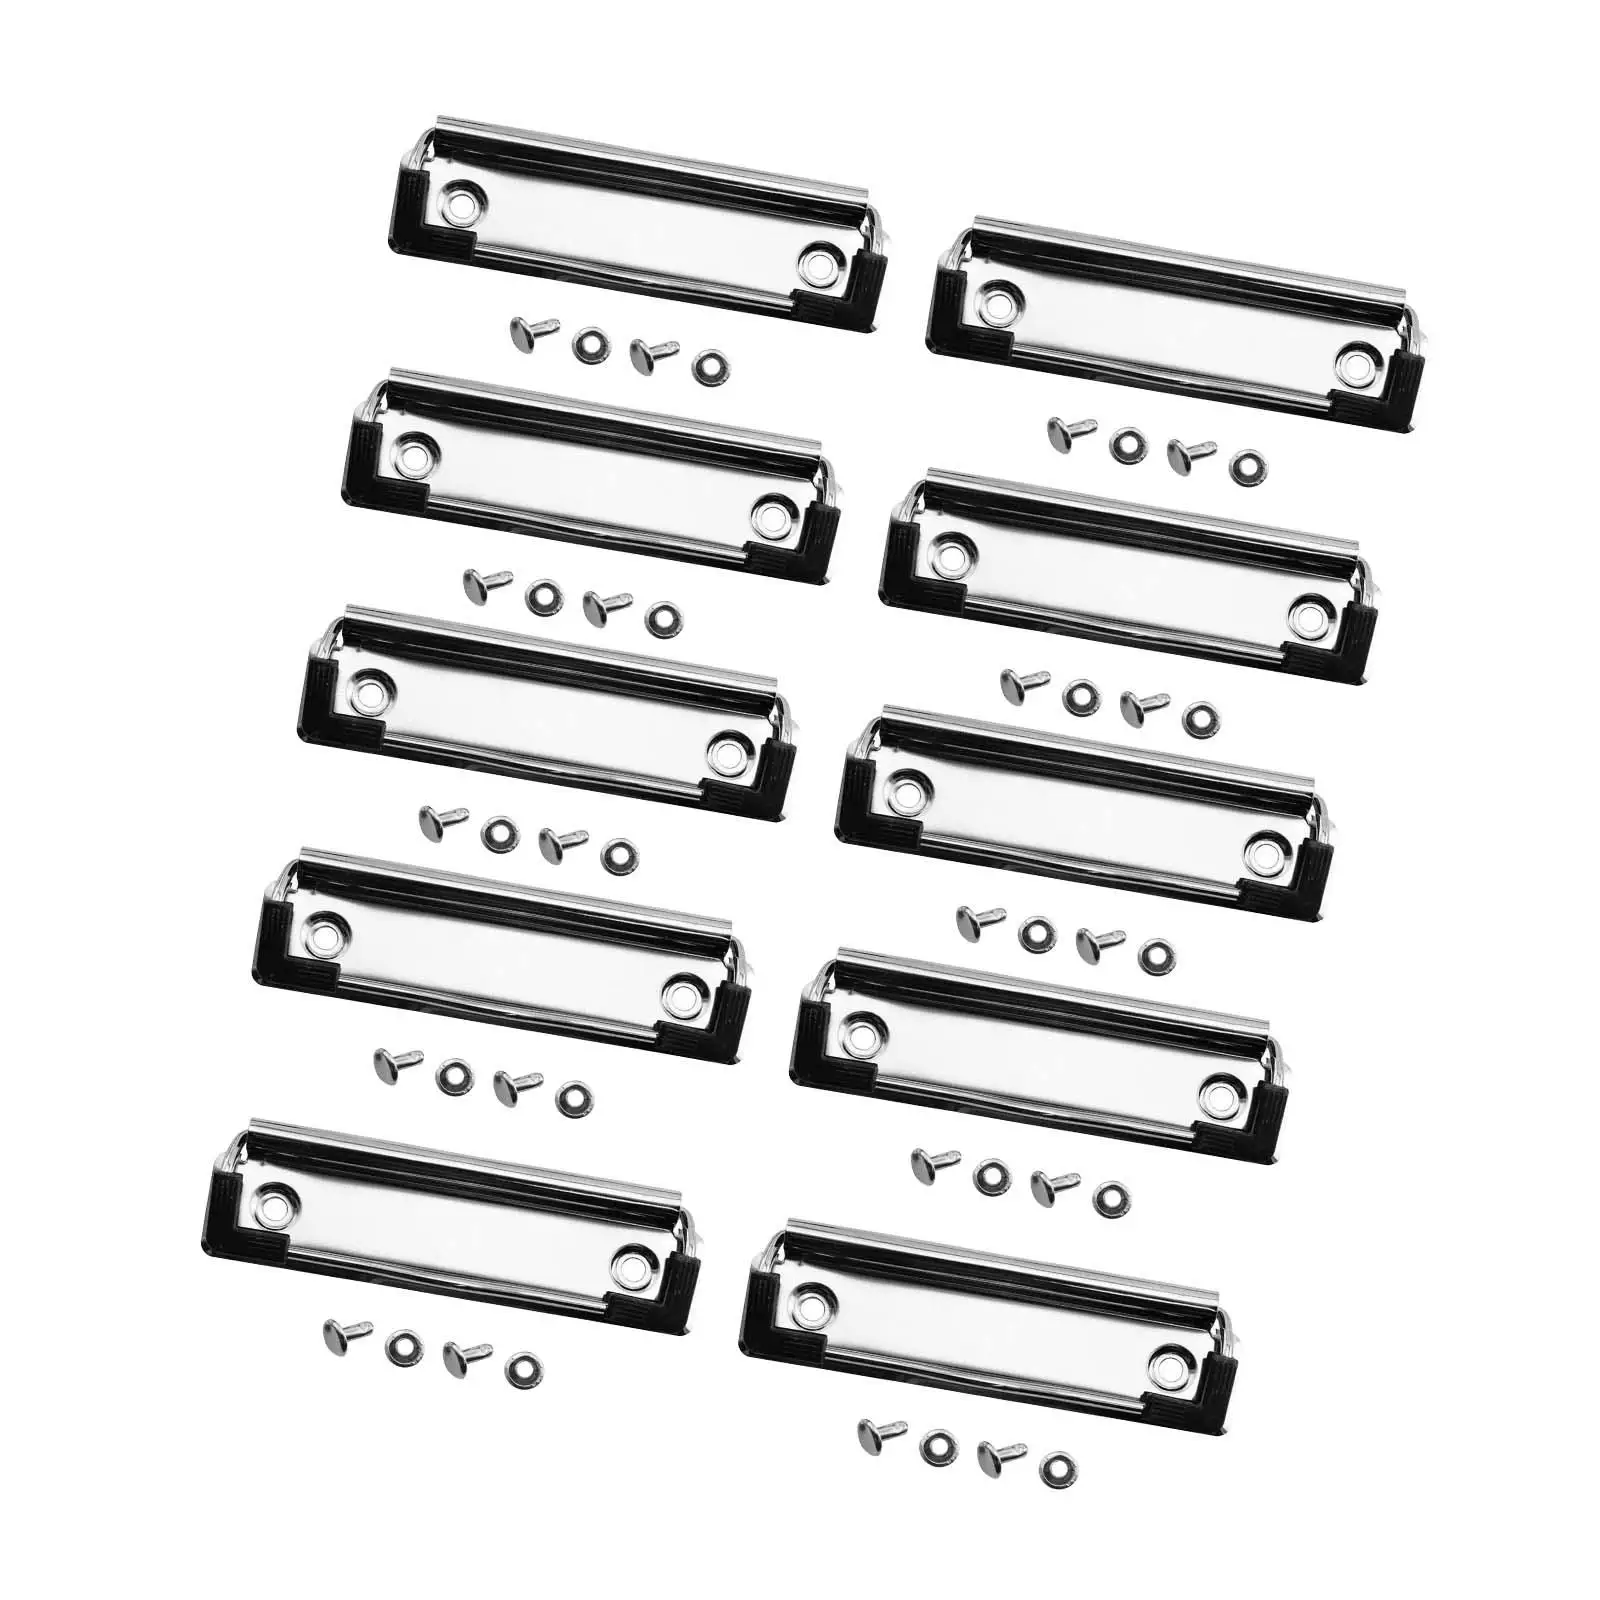 10 Pieces Clips for Clipboard Hardware Iron Document File Board Clips for Class Office Stationery Supplies Business